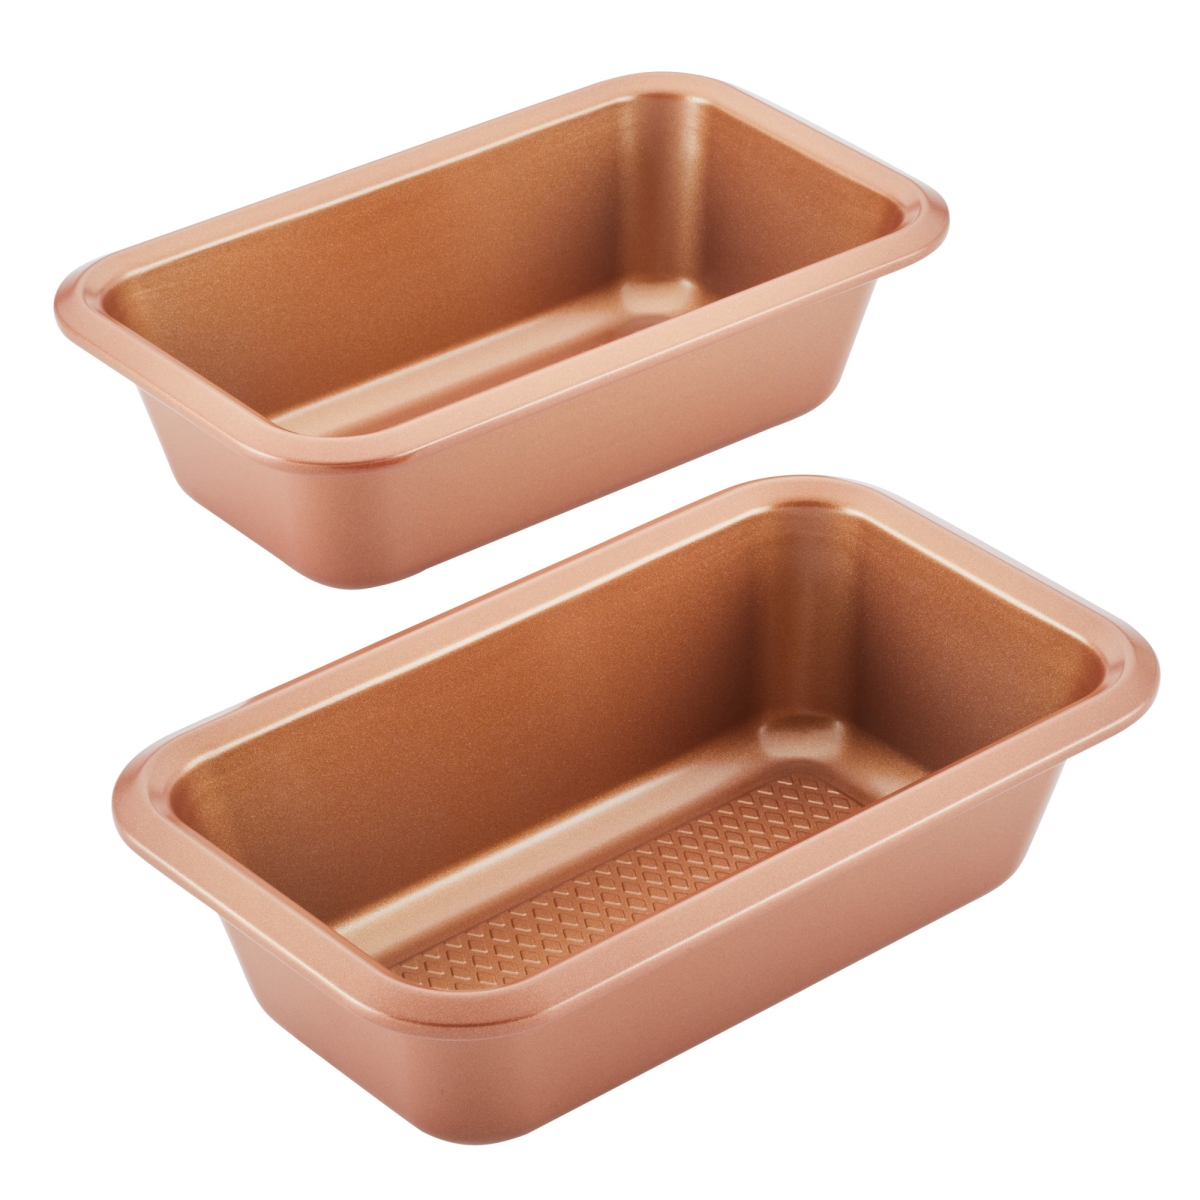 Picture of Ayesha Curry 48558 Bakeware Nonstick Loaf Pan Set, Copper - 2 Piece